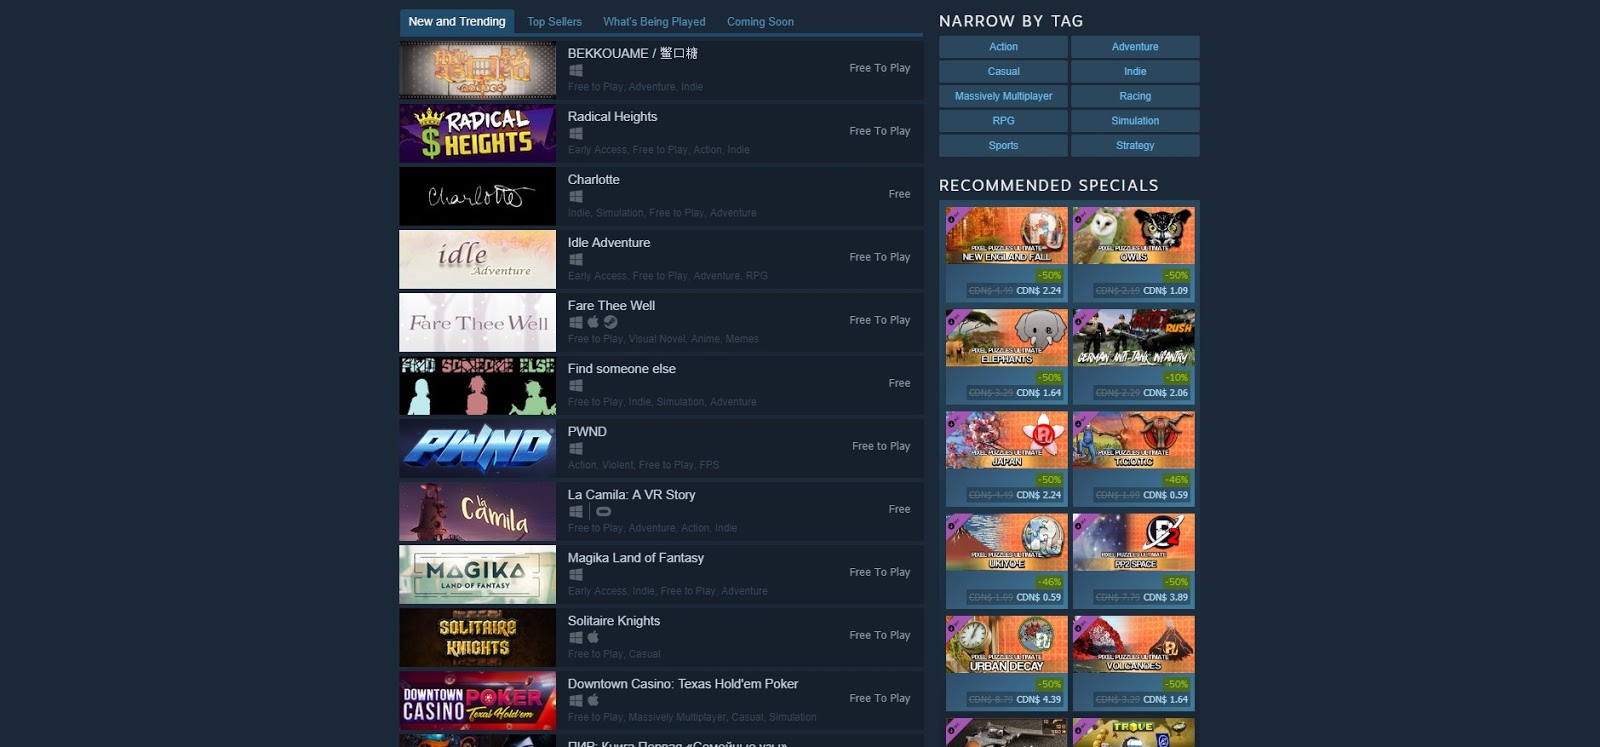 46 FREE GAMES ON STEAM 